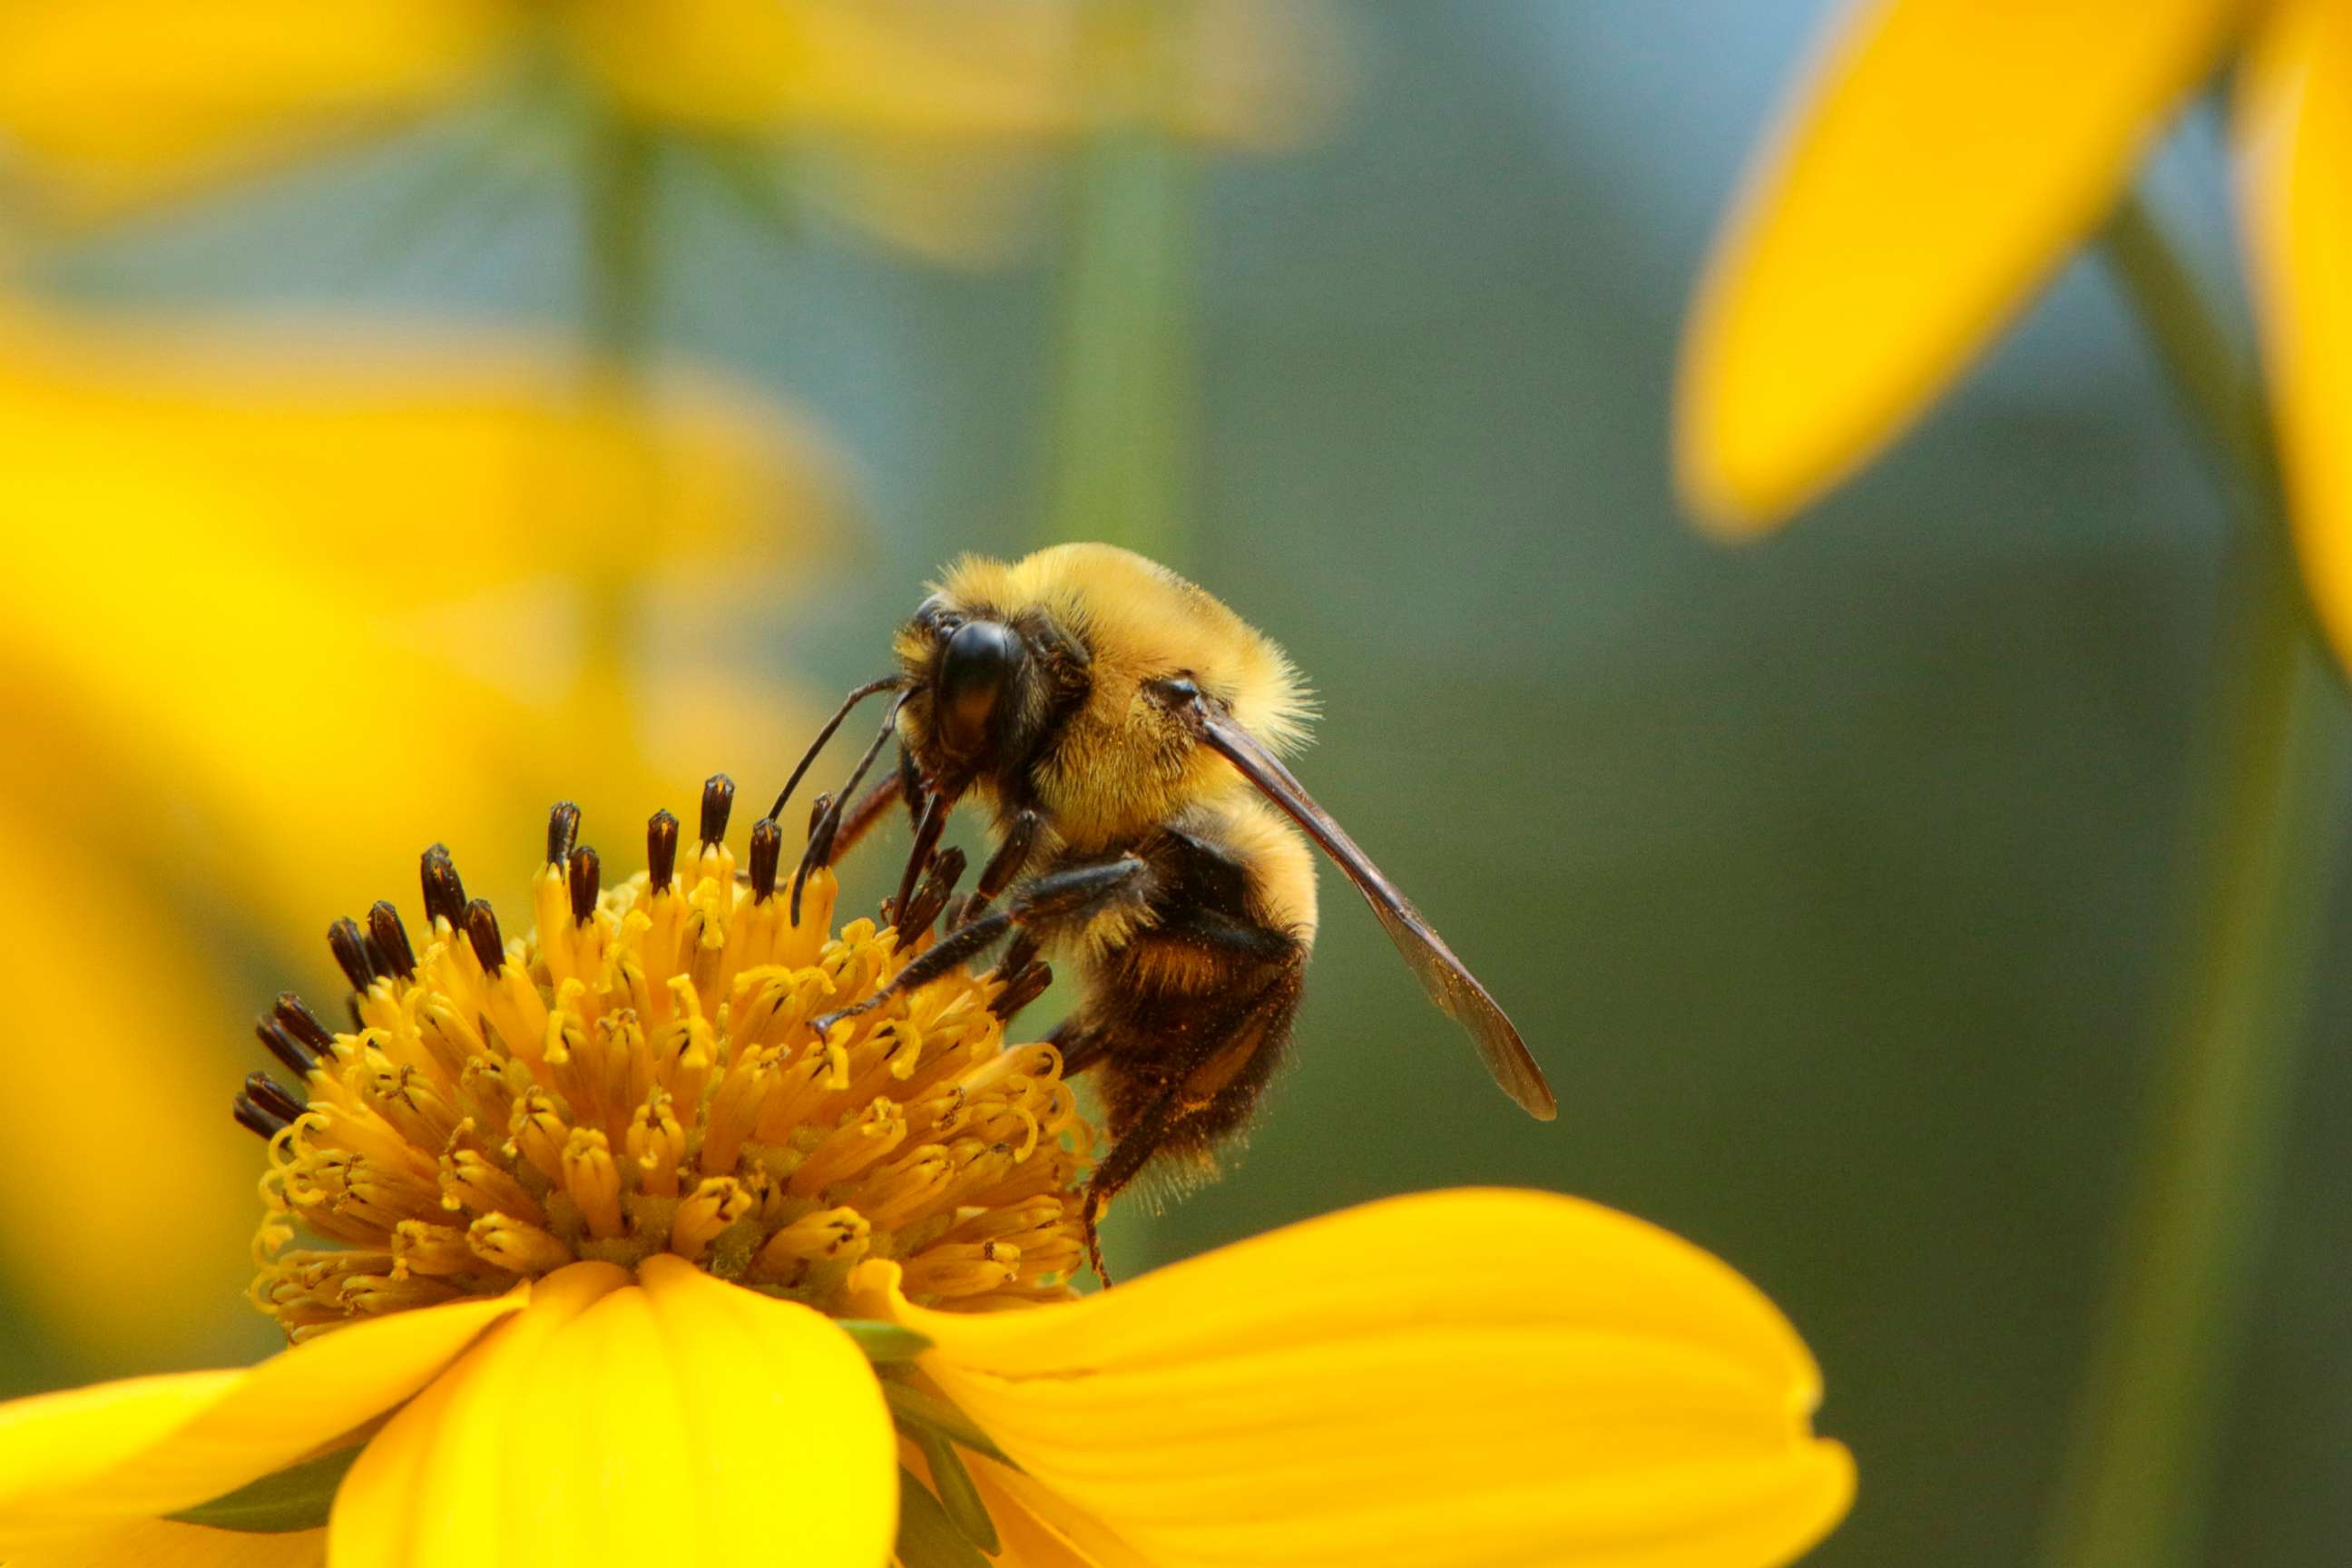 PHOTO: In this undated file photo, a bee is shown on a sunflower.